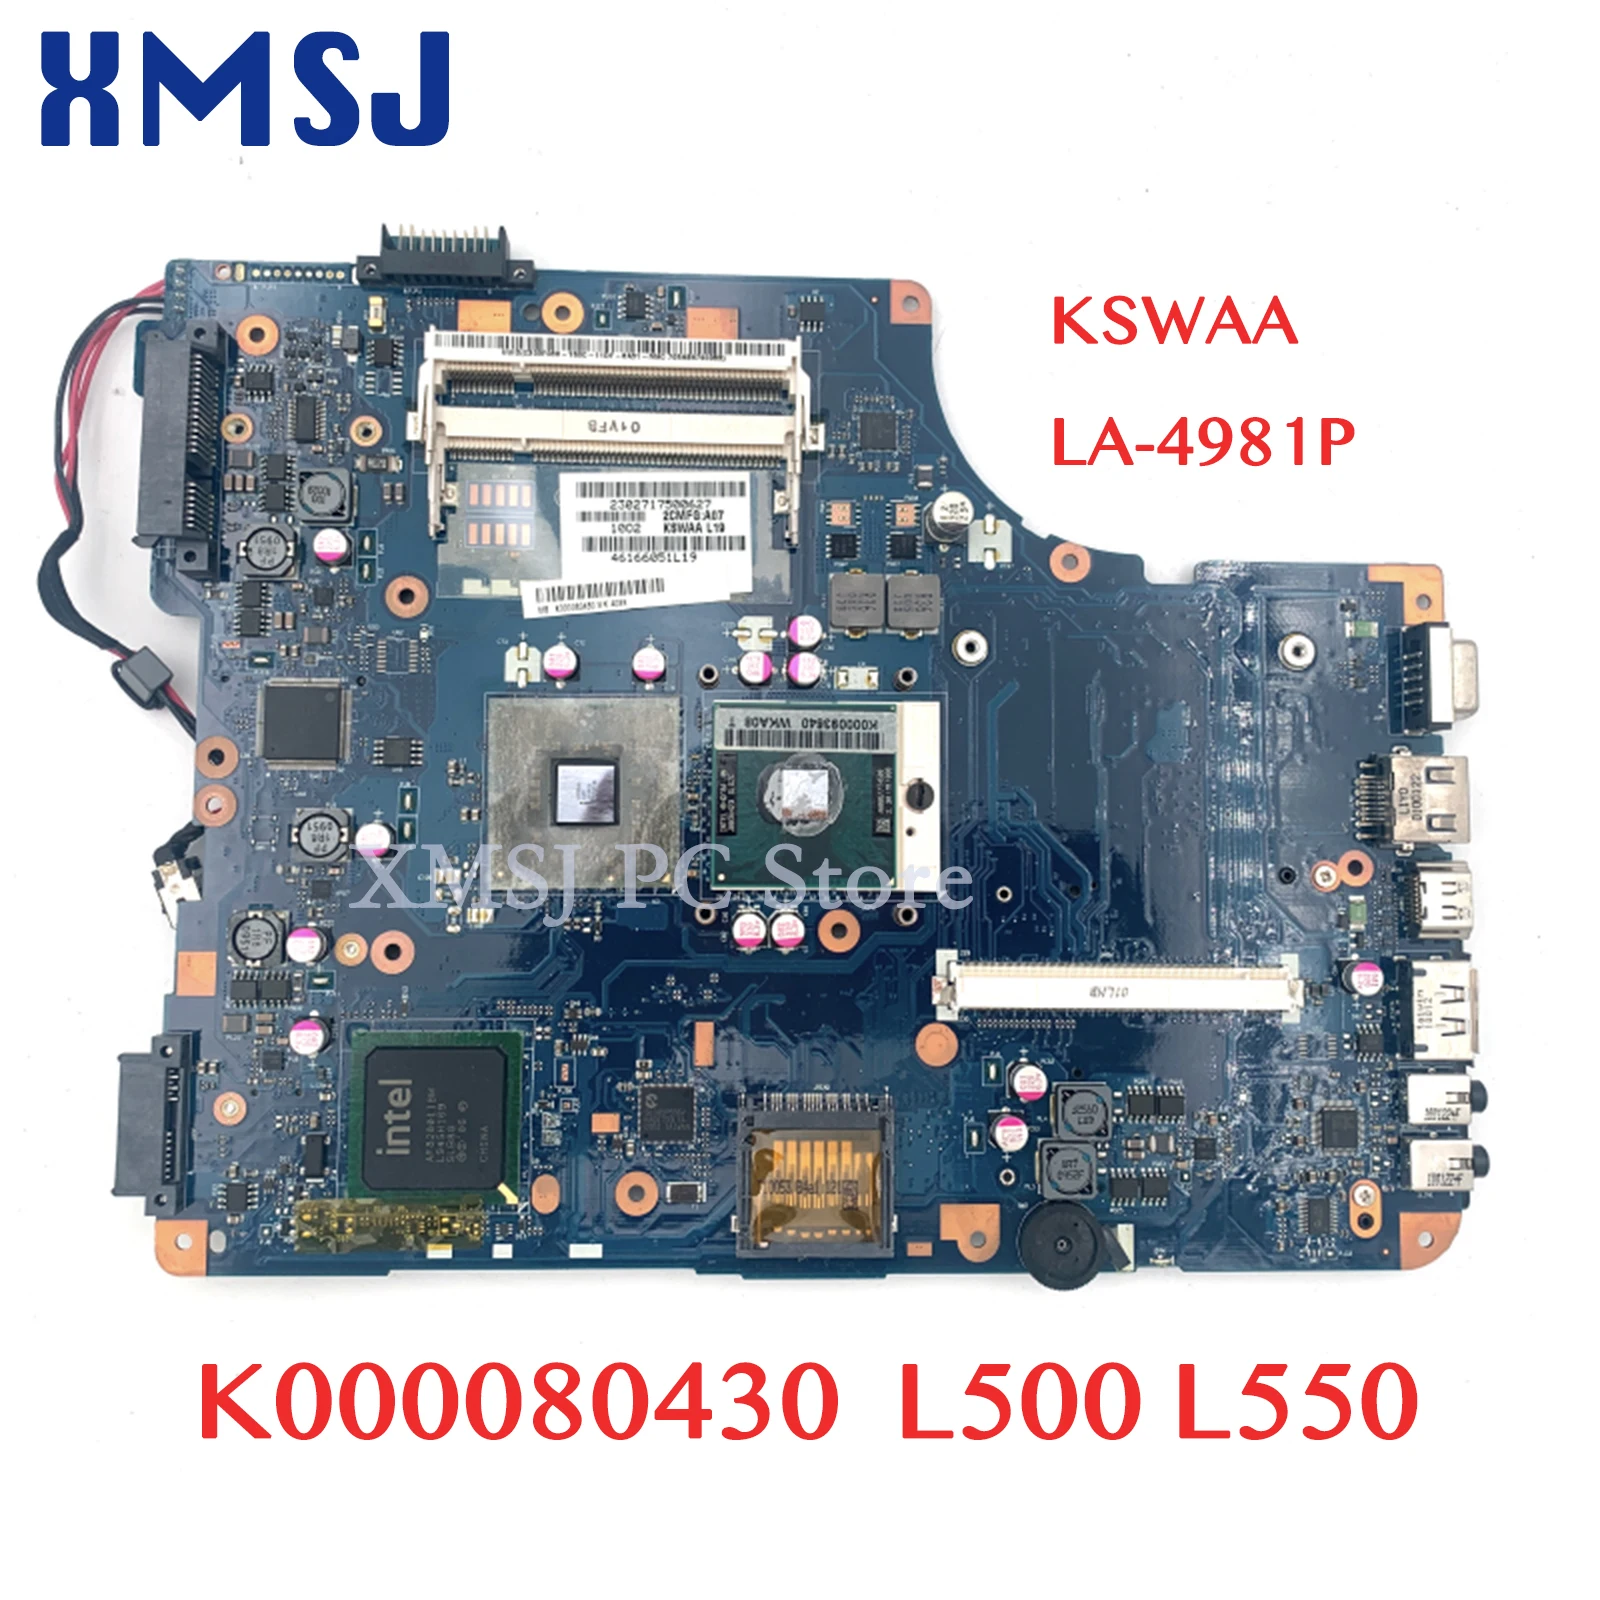 XMSJ K000080430 KSWAA LA-4981P For Toshiba Satellite L500 L550 Laptop Motherboard GM45 DDR2 Free CPU with graphics slot